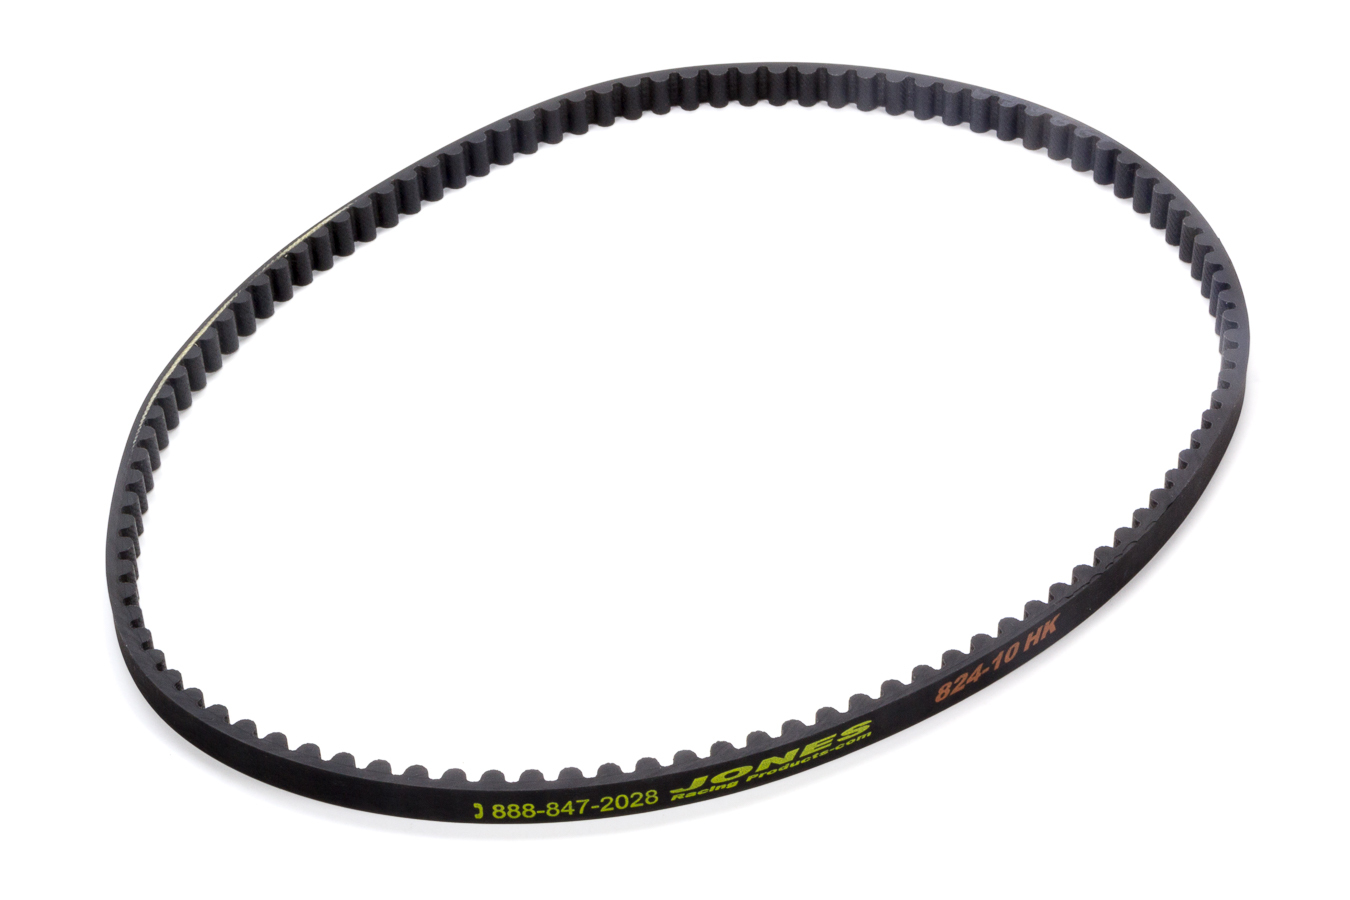 Jones Racing Products 824-10HD HTD Drive Belt, 32.440 in Long, 10 mm Wide, 8 mm Pitch, Each